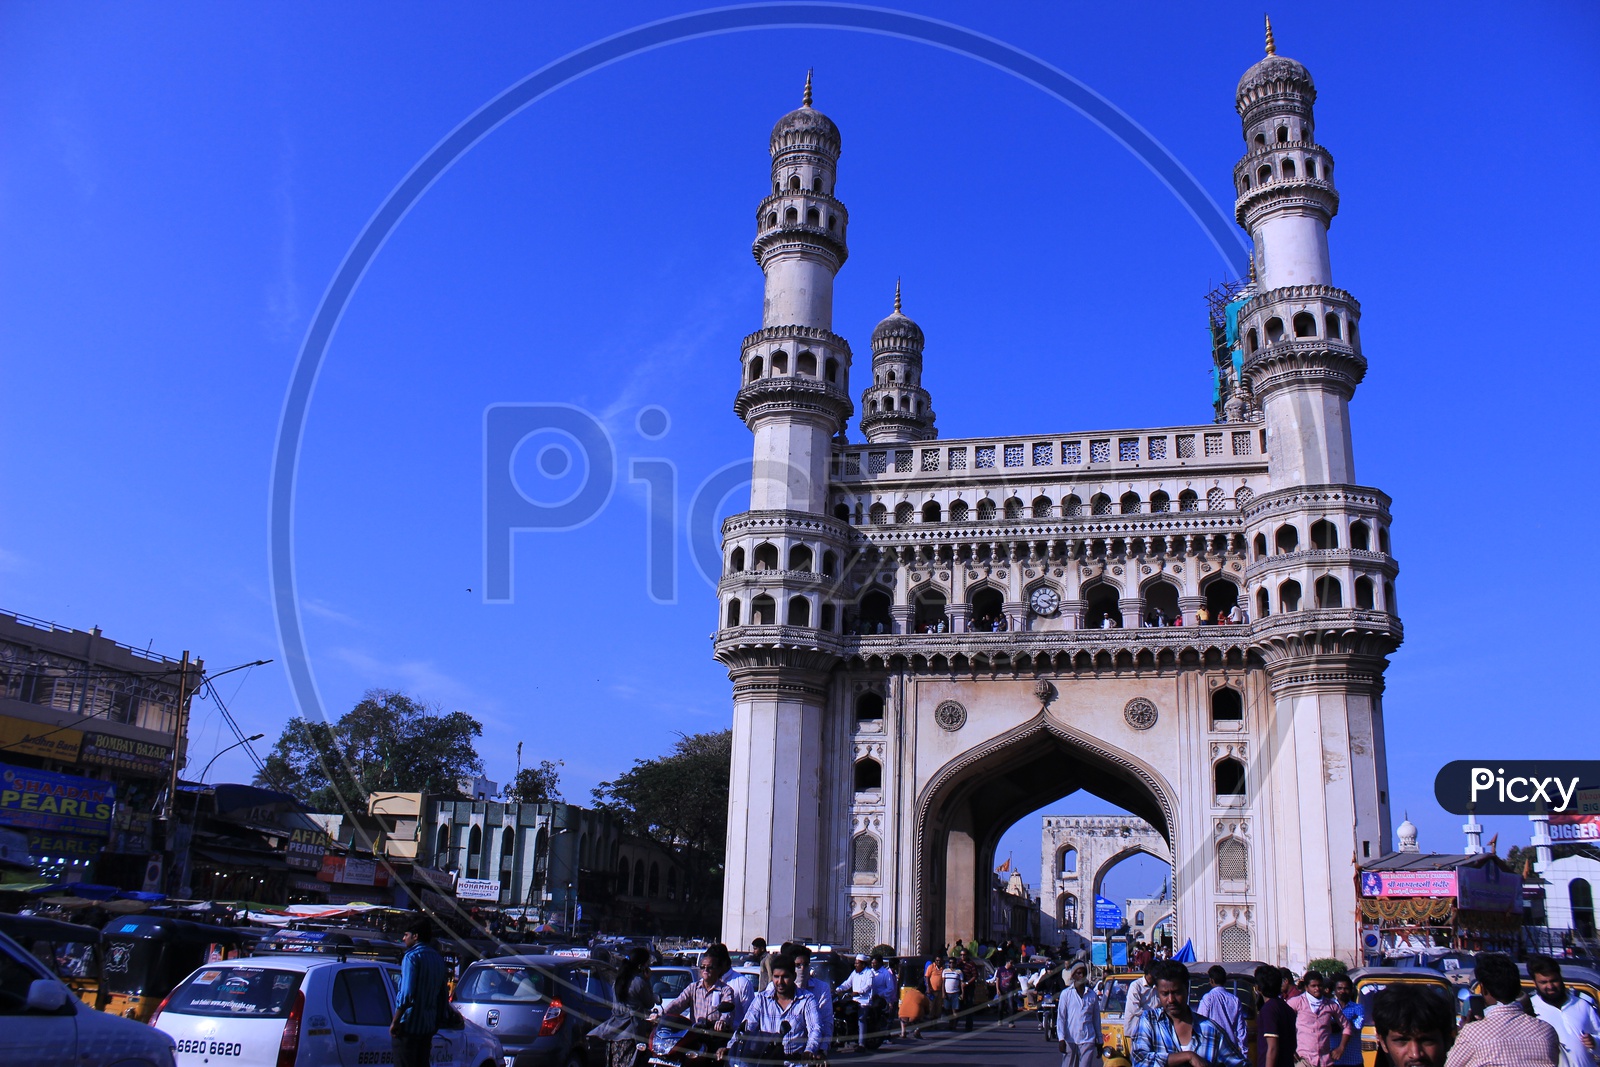 Majestic Charminar View With Autos And Visitors With Blue Hour Sky in Background